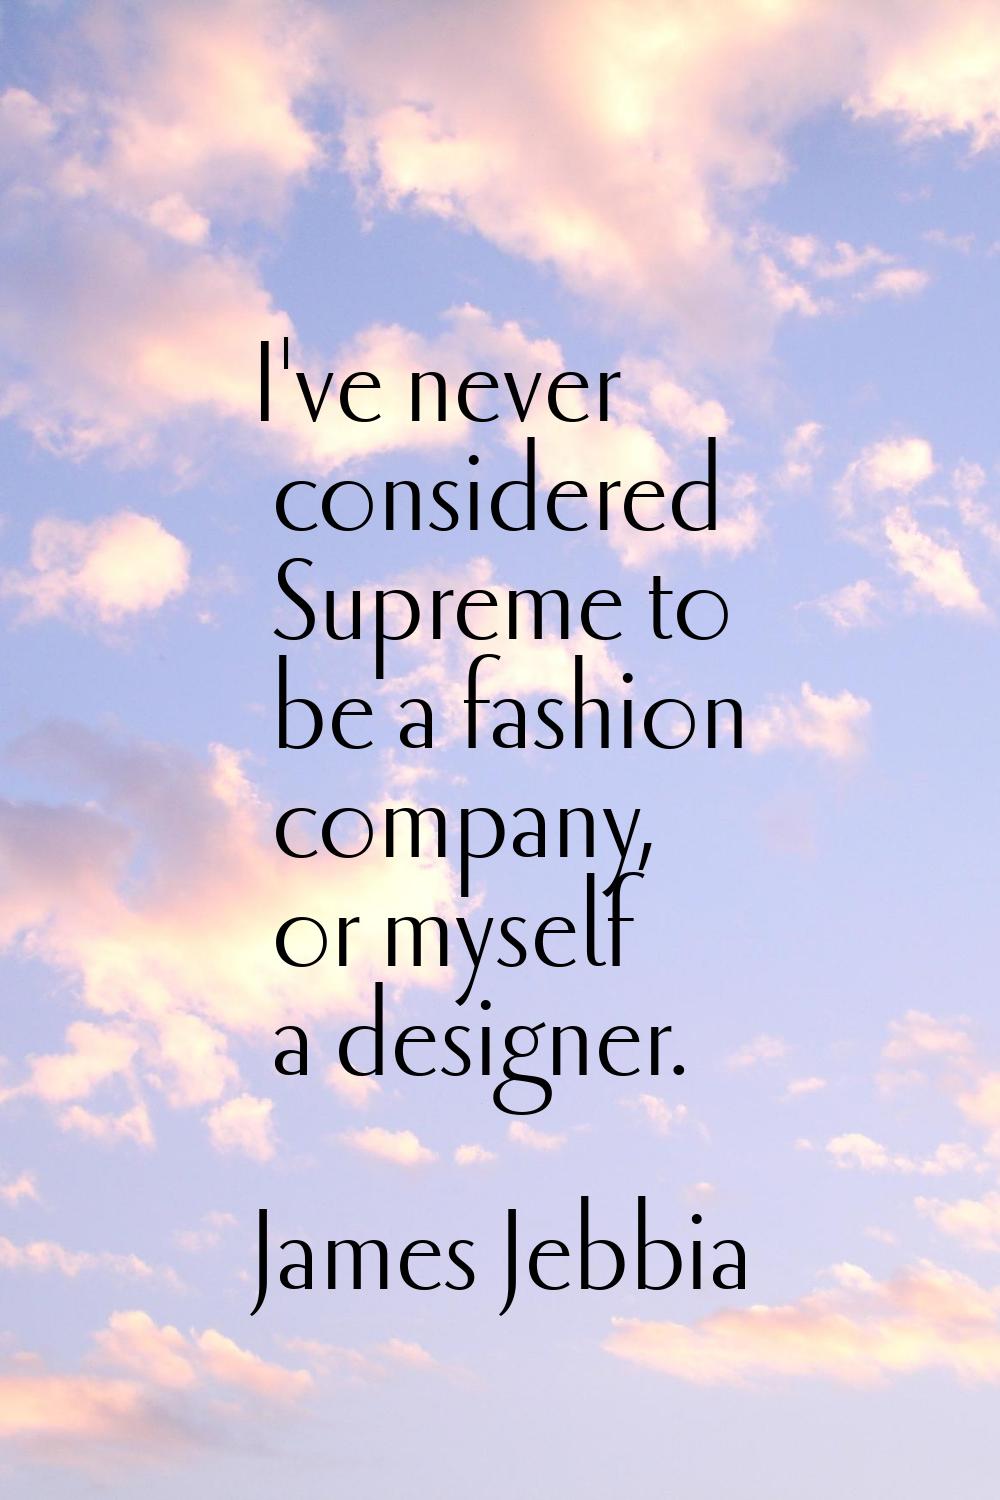 I've never considered Supreme to be a fashion company, or myself a designer.